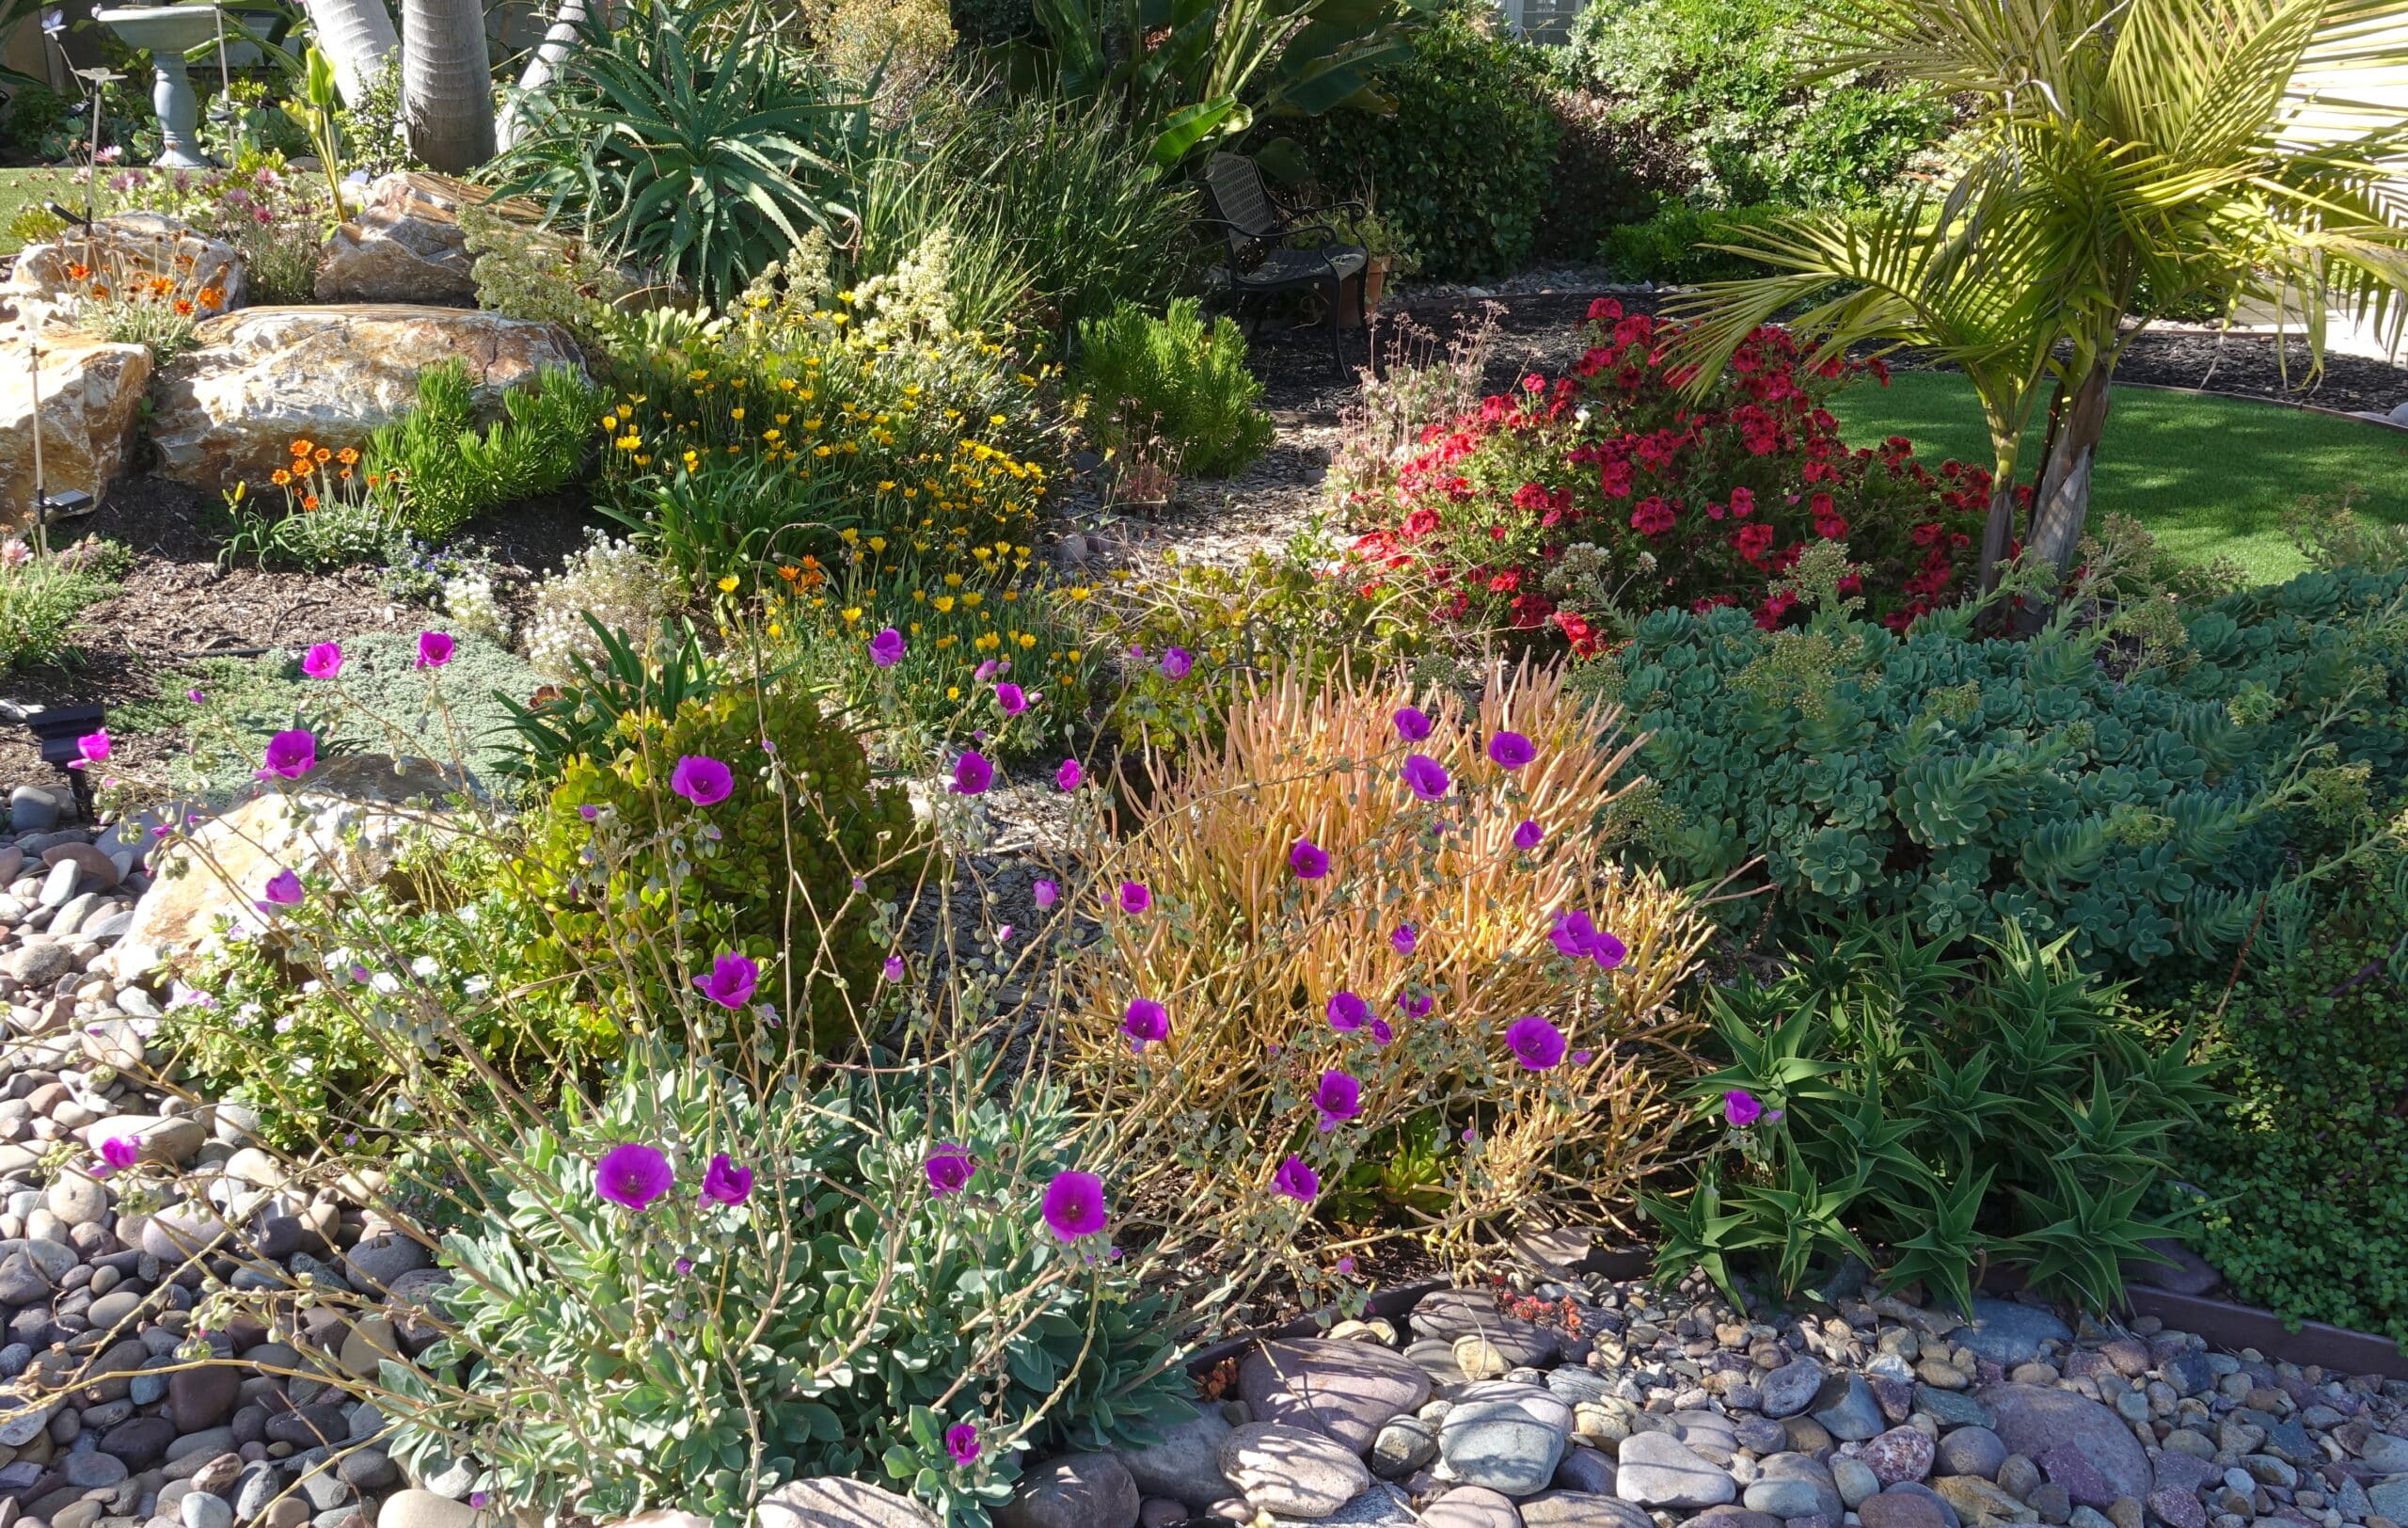 Shrubs and succulents in bloom in a drought tolerant landscaping